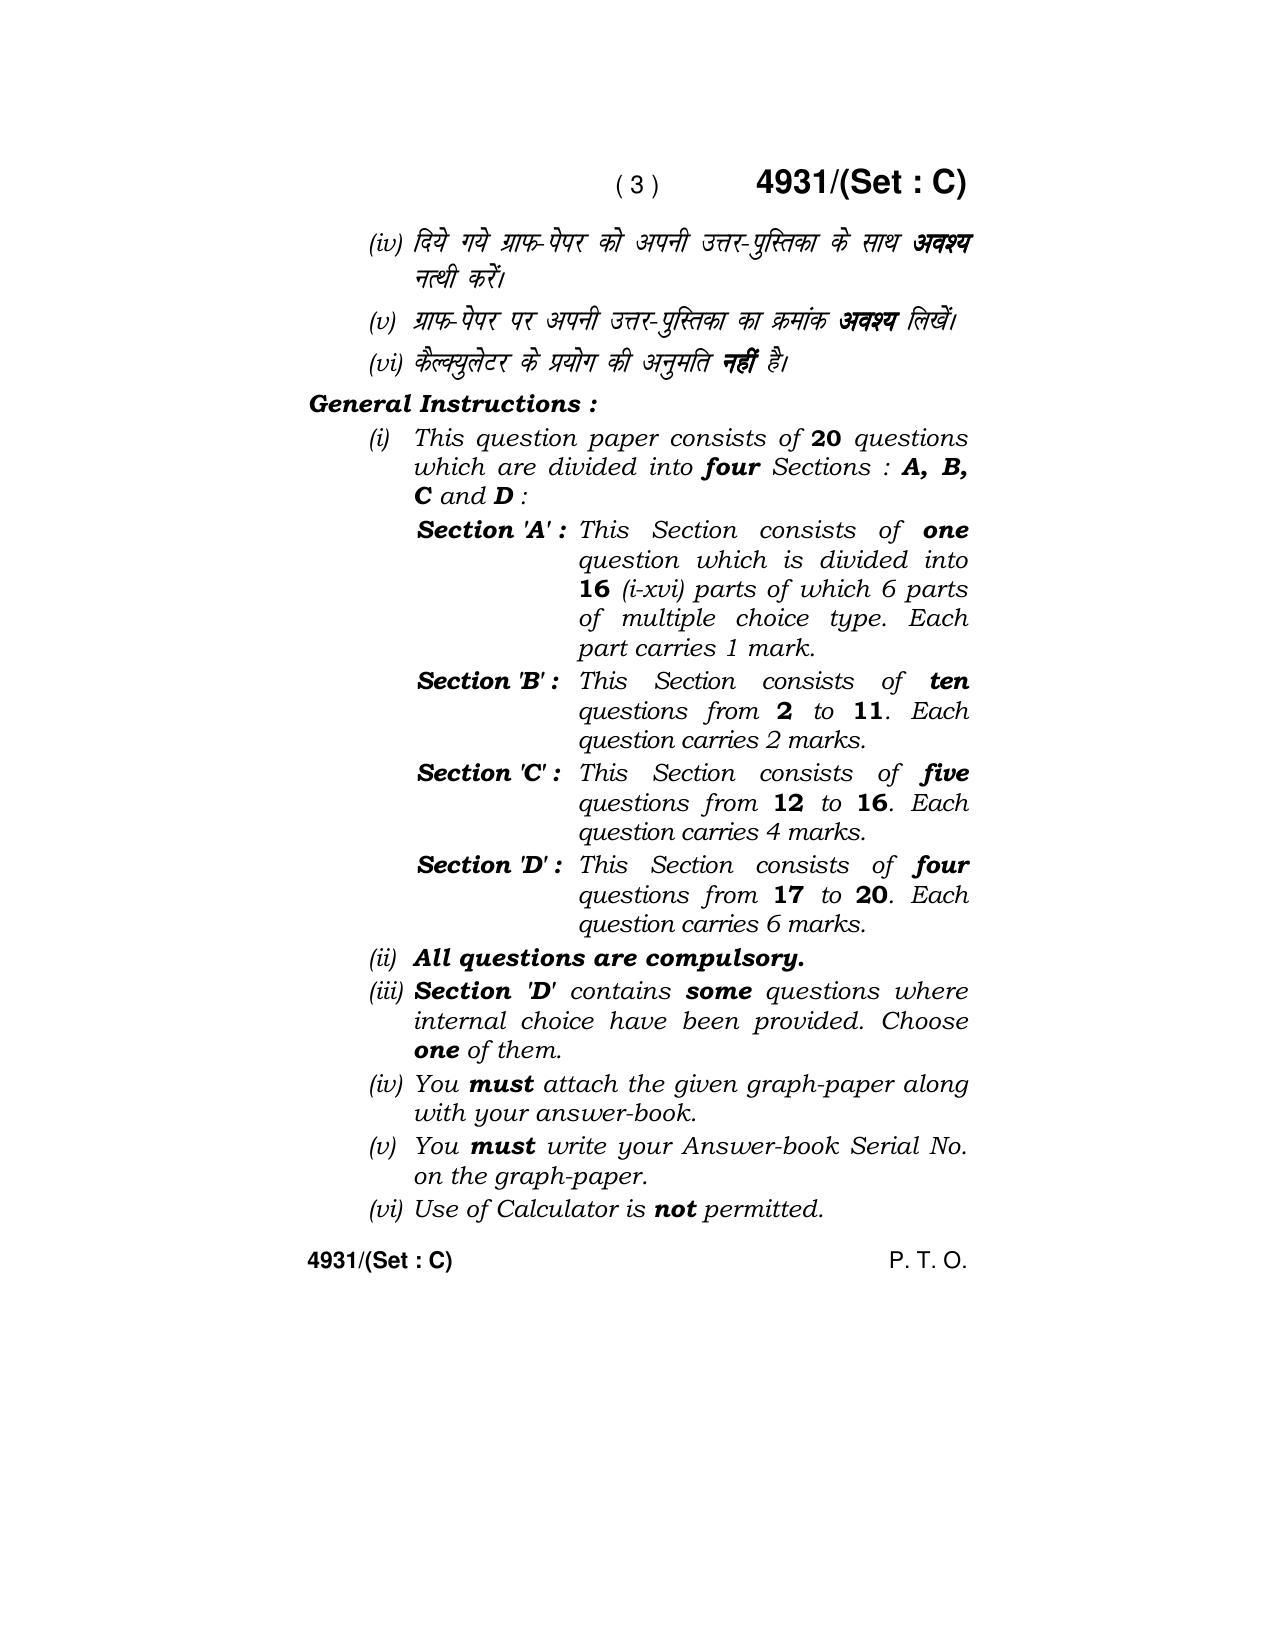 Haryana Board HBSE Class 12 Mathematics 2020 Question Paper - Page 35